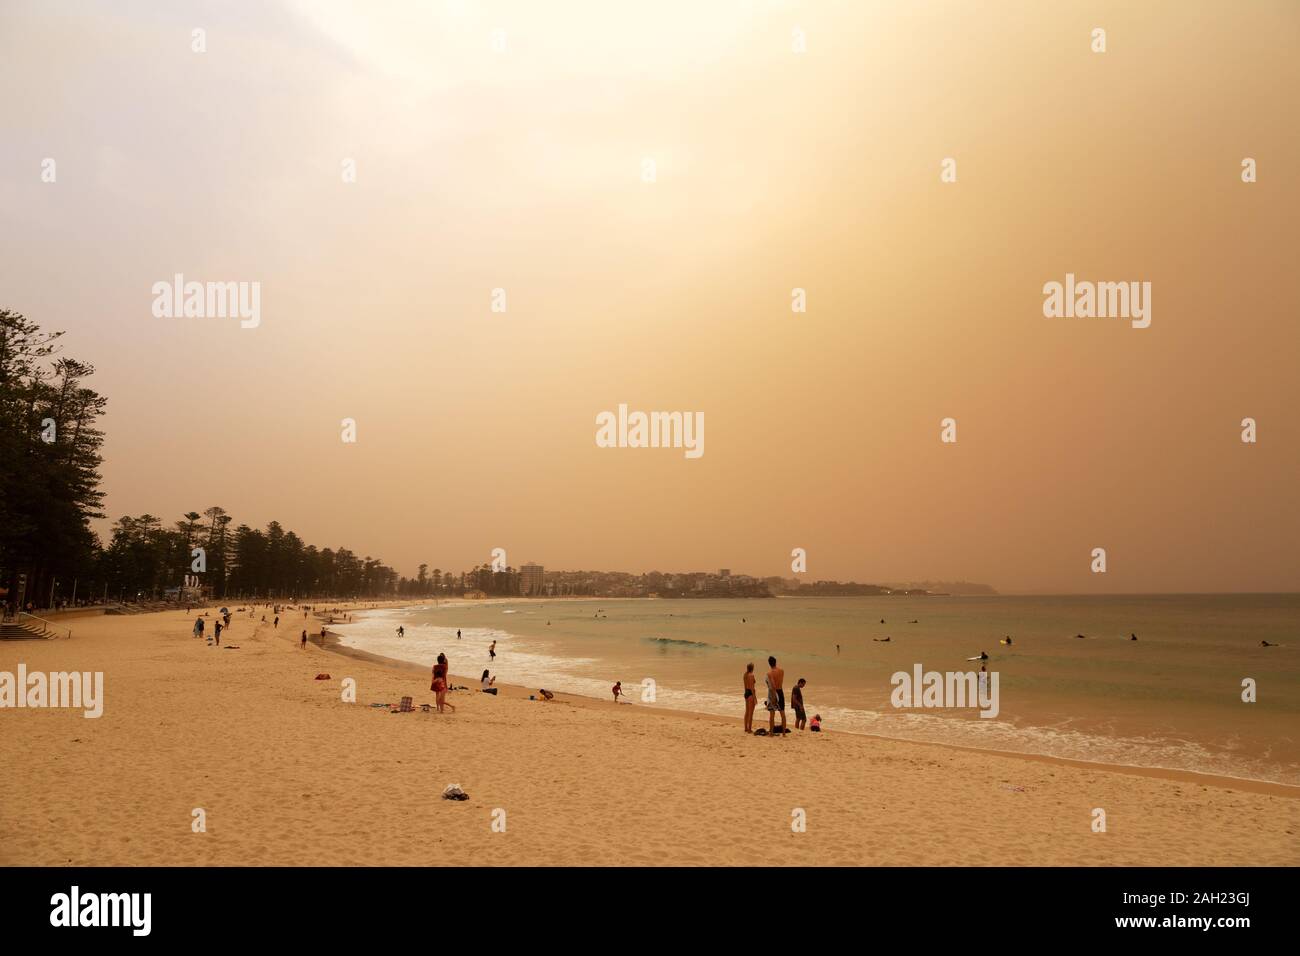 Sydney bushfires; a pall of smoke over Manly beach due to the bushfires, possible example of Climate Change,Manly, Sydney Australia Stock Photo